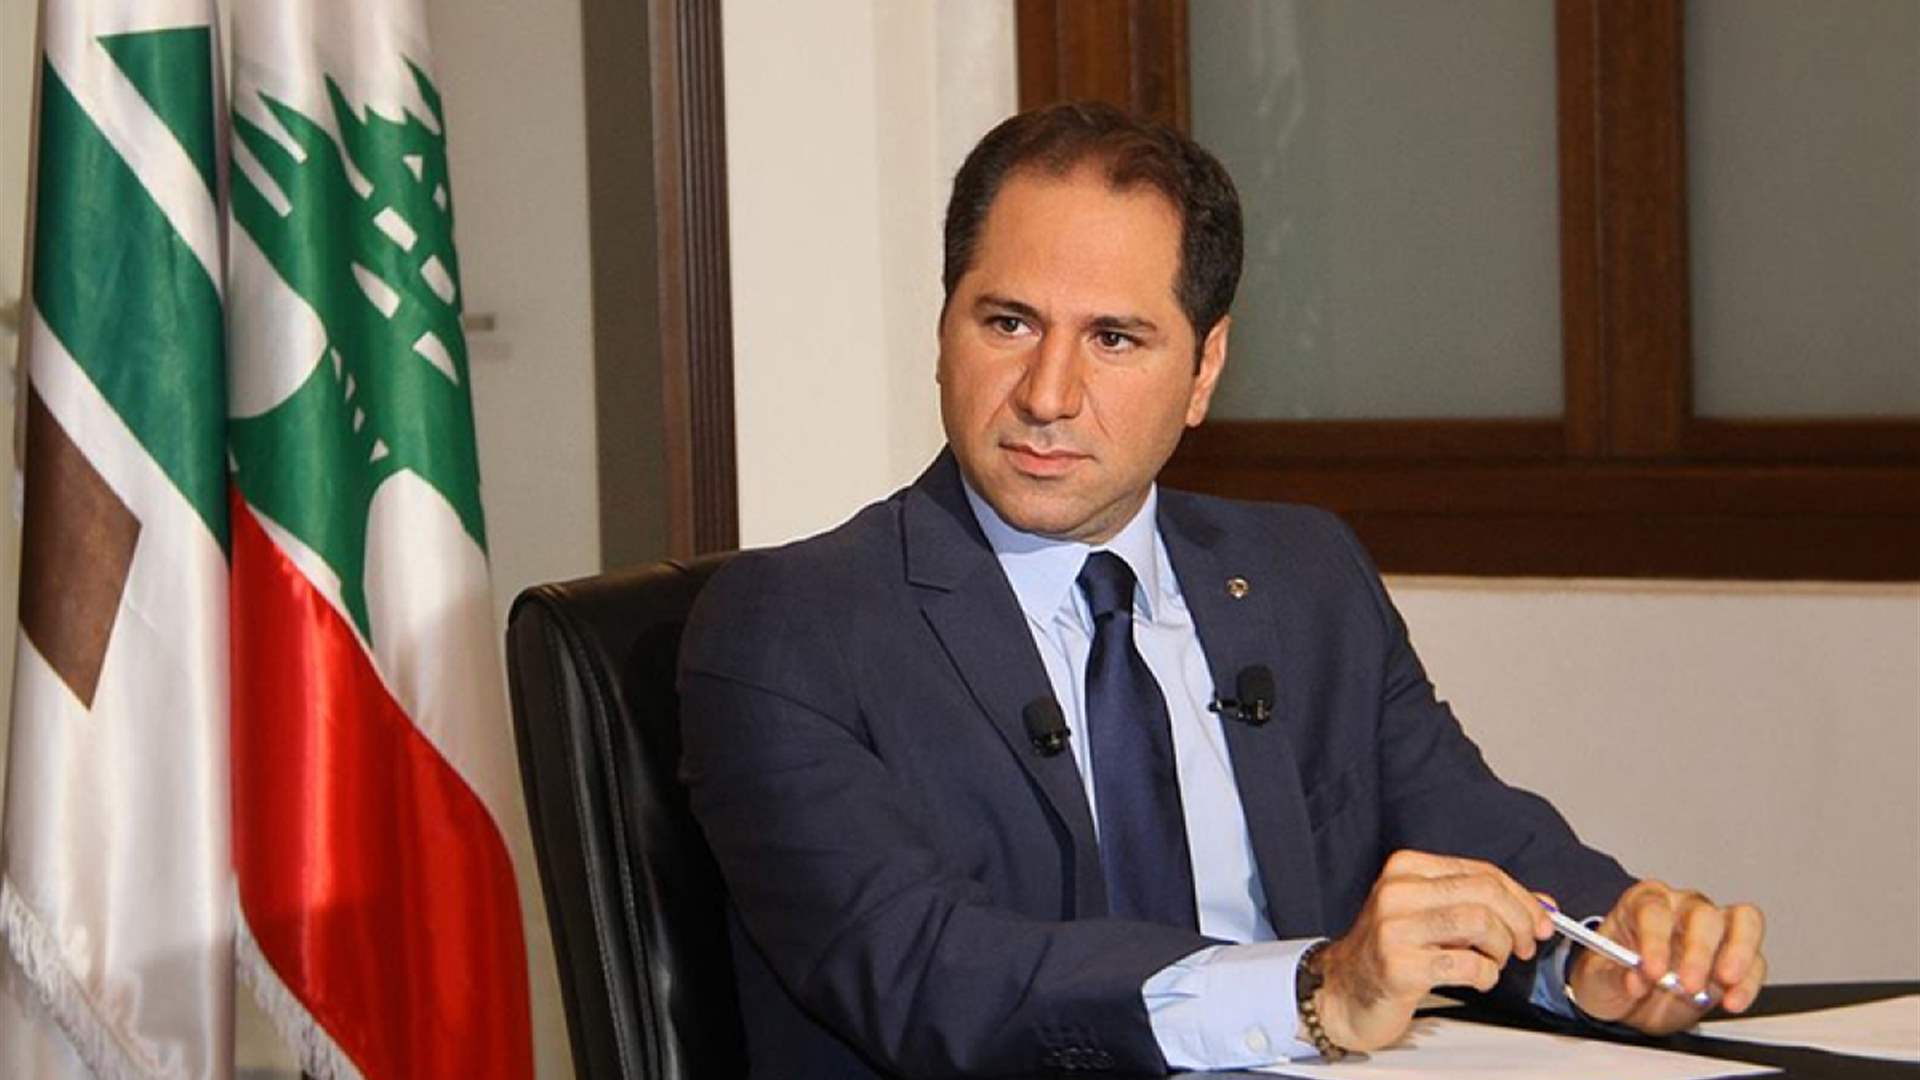 MP Gemayel discusses presidential candidates, Hezbollah, and Syrian refugee crisis